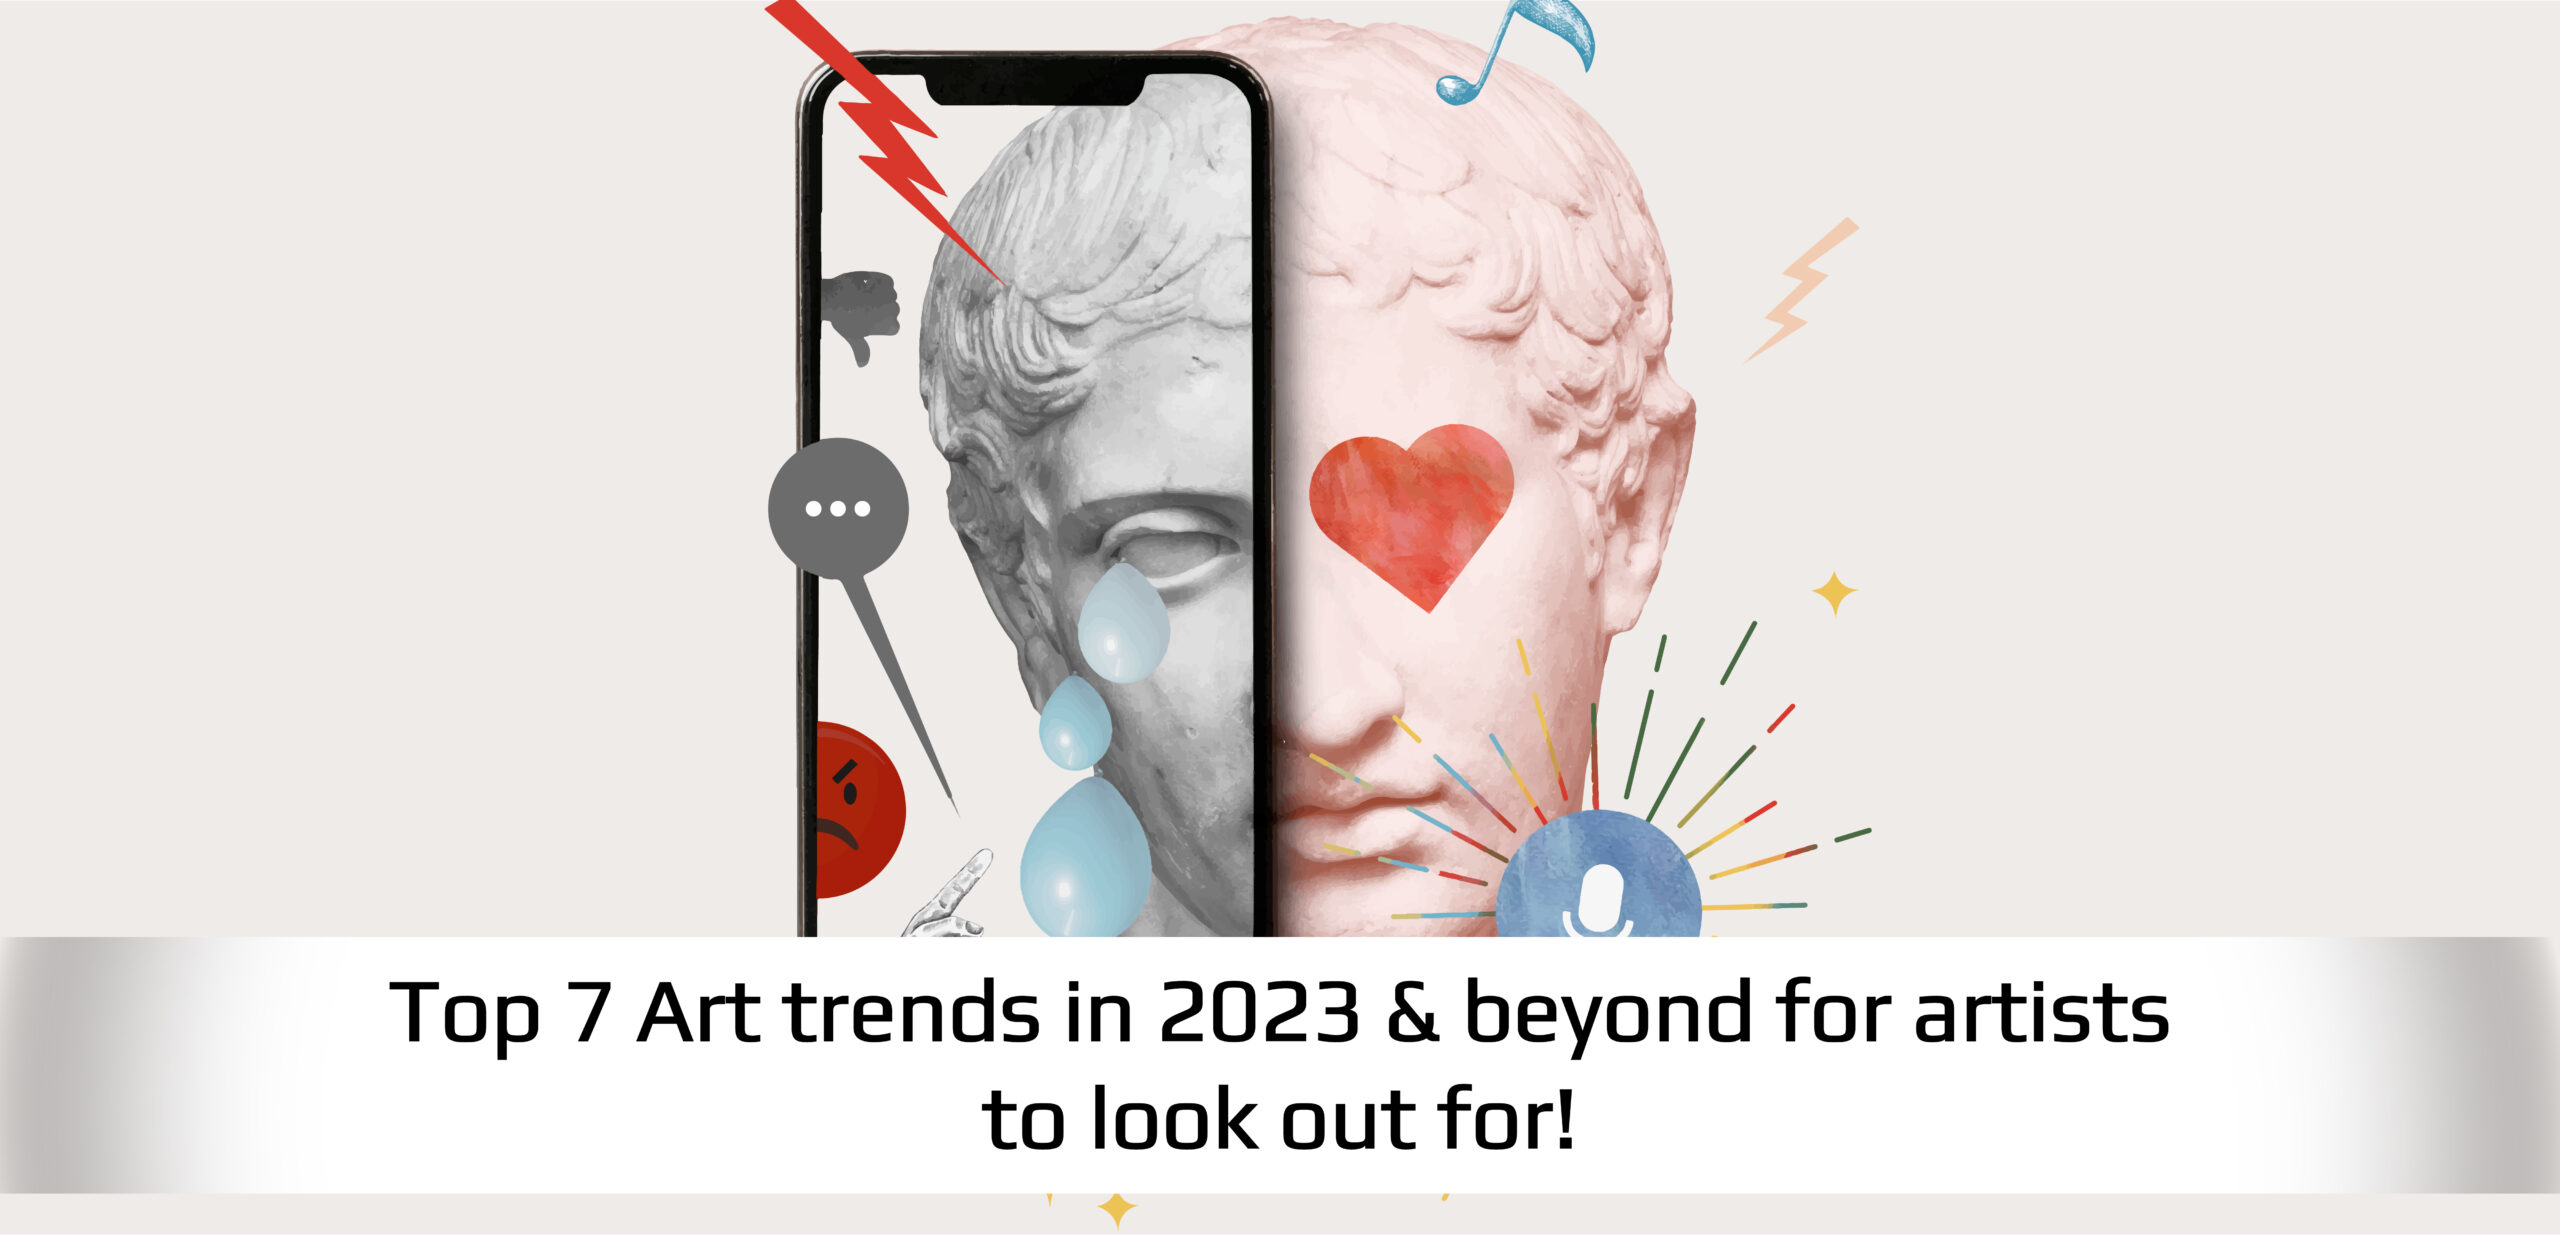 Top 7 Art trends in 2023 for artists